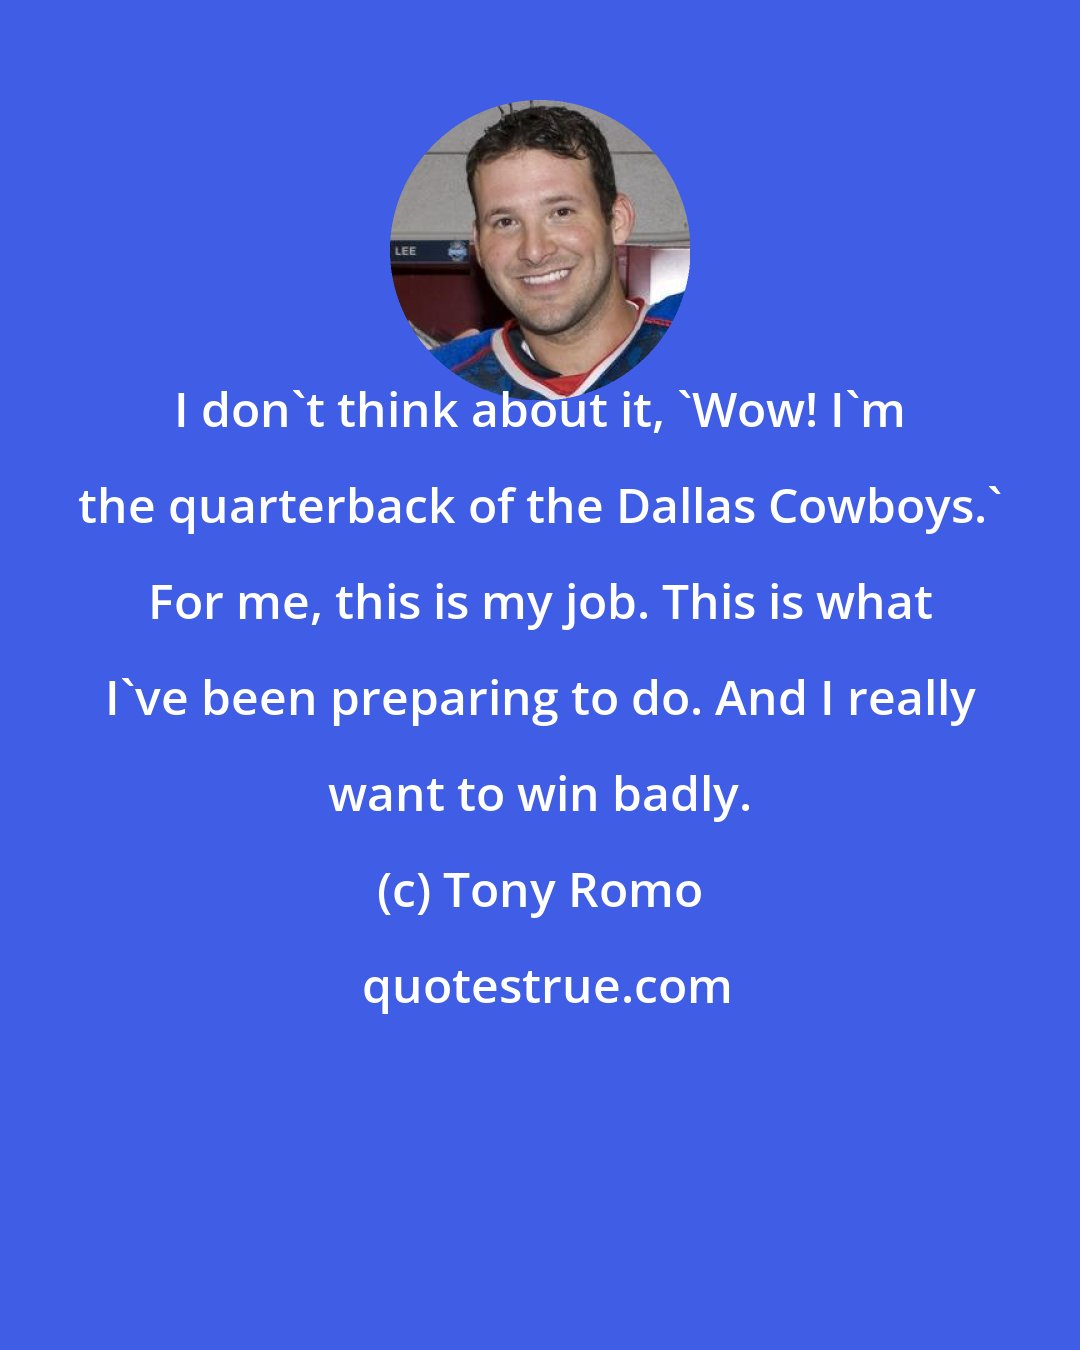 Tony Romo: I don't think about it, 'Wow! I'm the quarterback of the Dallas Cowboys.' For me, this is my job. This is what I've been preparing to do. And I really want to win badly.